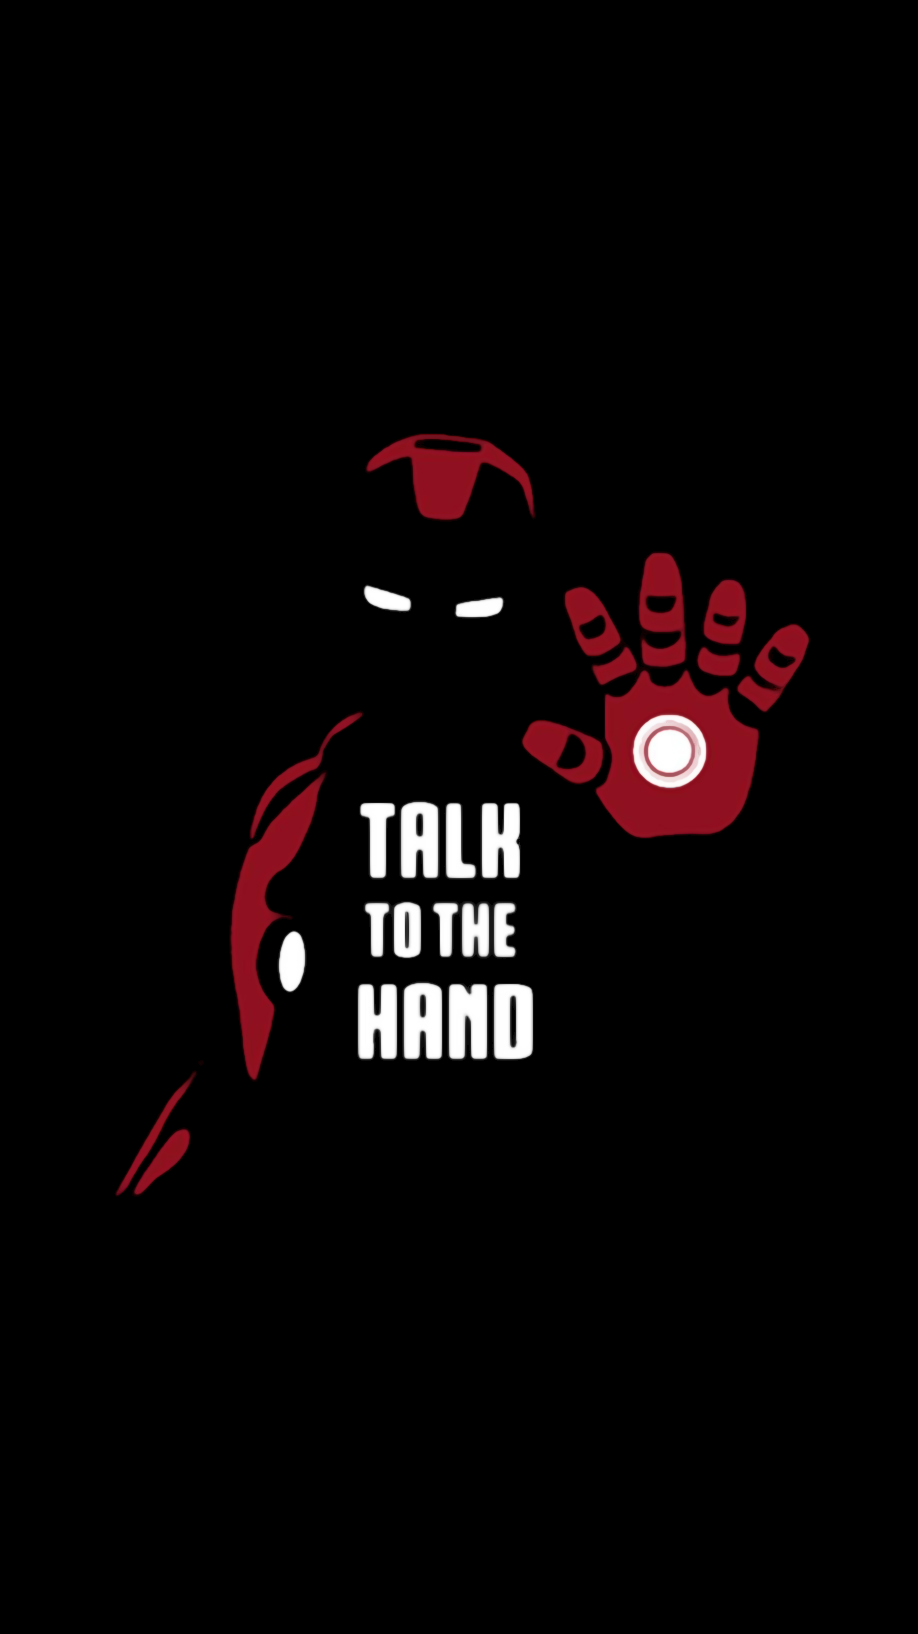 Talk To The Hand [918x1634] (i.redd.it) Submitted By D_ope To R Amoledbackground 0 Comme. Imagens Vingadores, Papel De Parede Marvel, Papel De Parede Vingadores